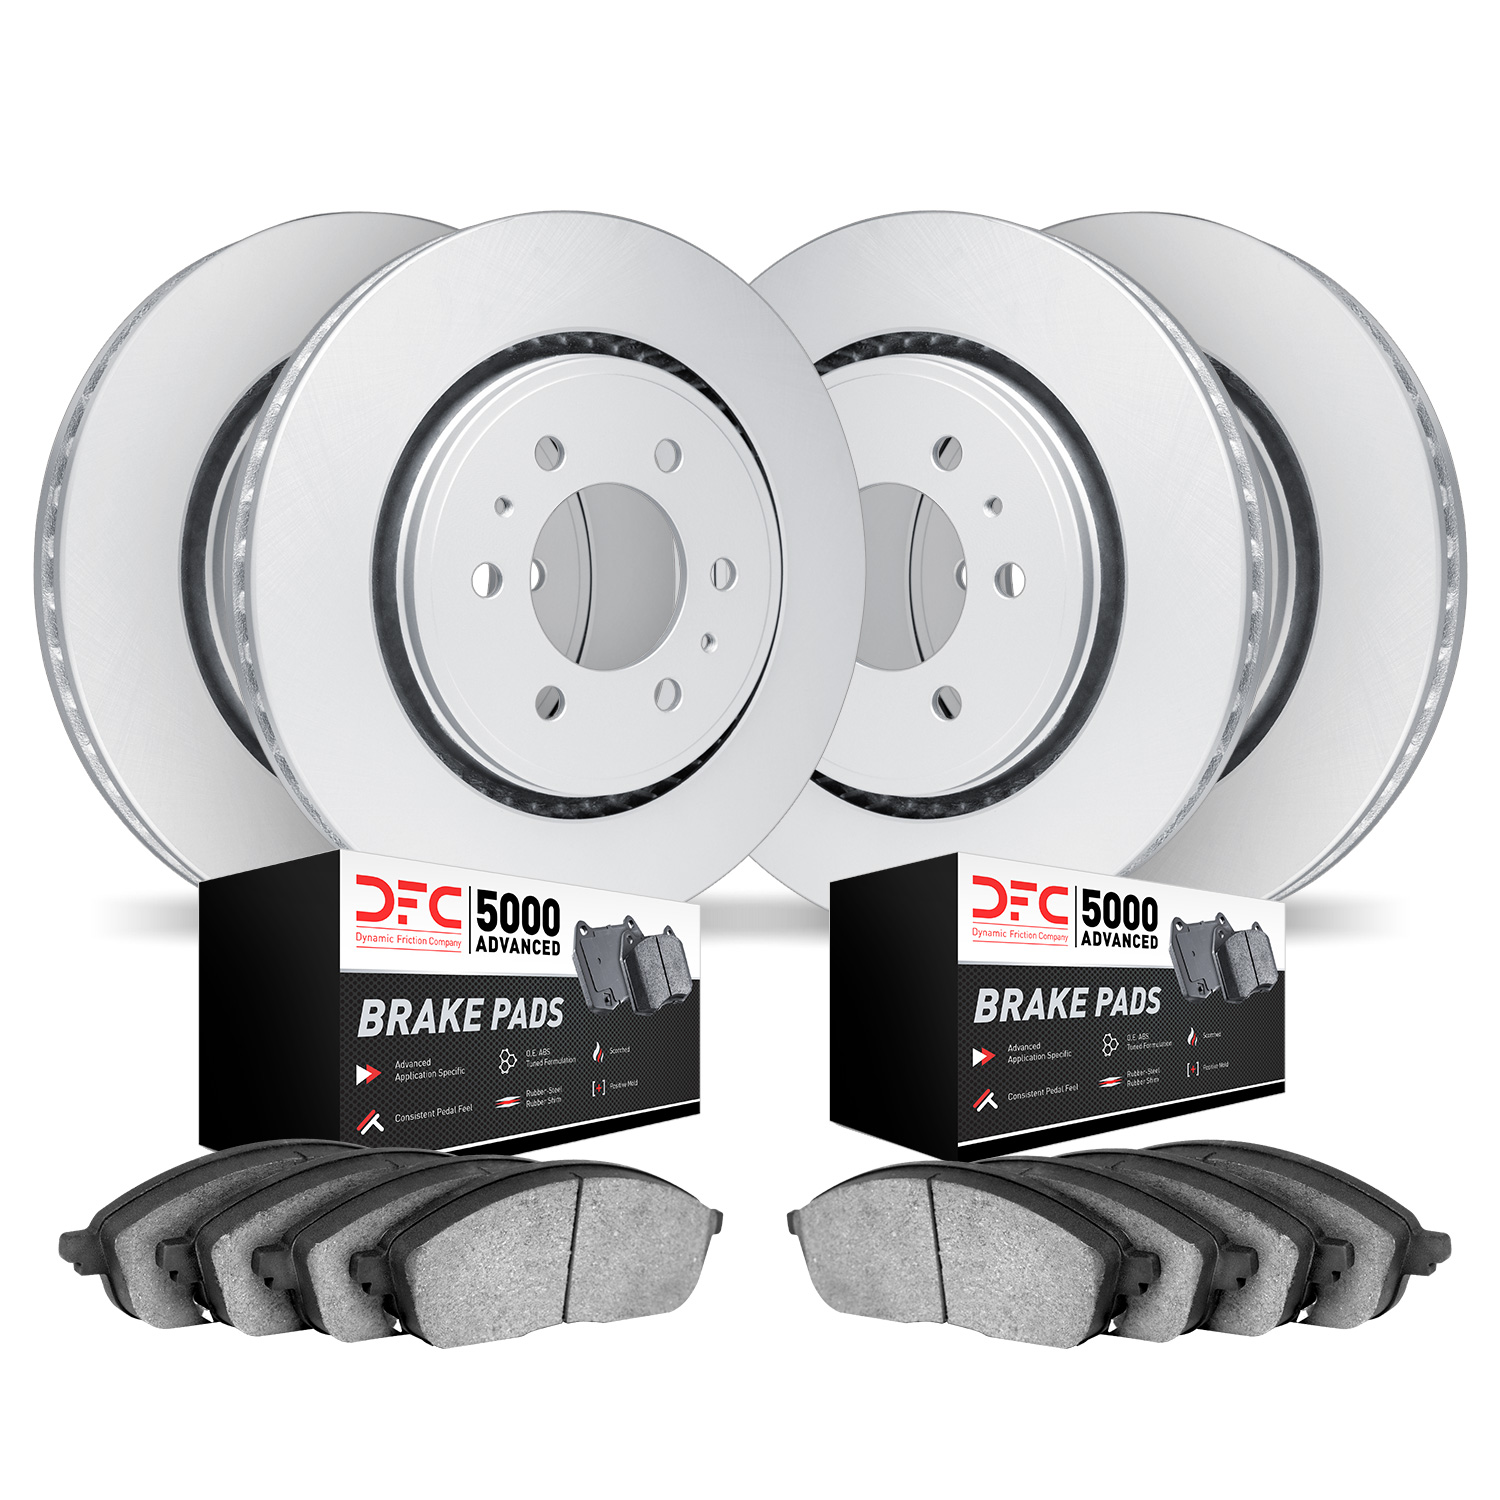 4504-46013 Geospec Brake Rotors w/5000 Advanced Brake Pads Kit, 2004-2009 GM, Position: Front and Rear